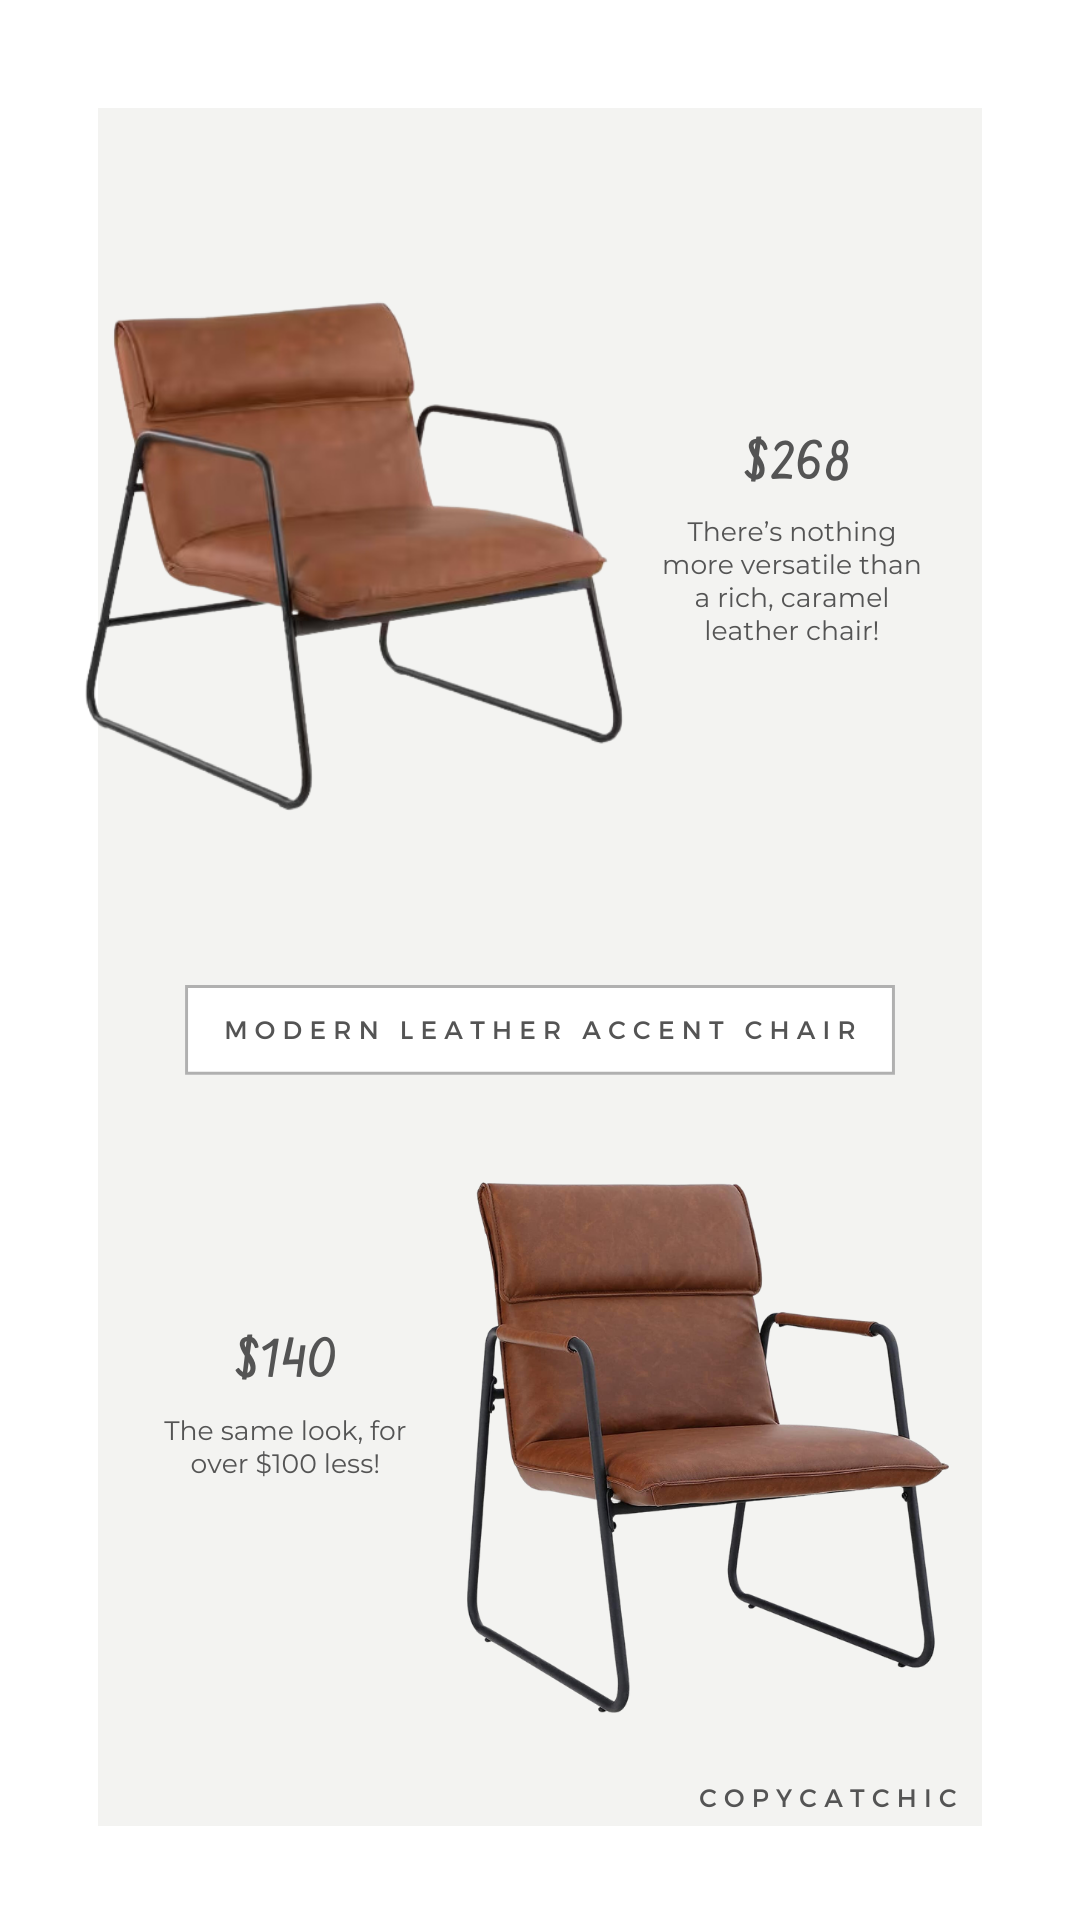 Look for Less: Modern Leather and Steel Accent Chair, Lumisource Casper Camel Faux Leather and Metal Armchair vs Amazon Maison Arts Steel Frame Leather Accent Chair, daily find, dupe, copycatchic luxe living for less, budget home decor and design, daily dupes, home trends, sales, budget travel and room inspiration